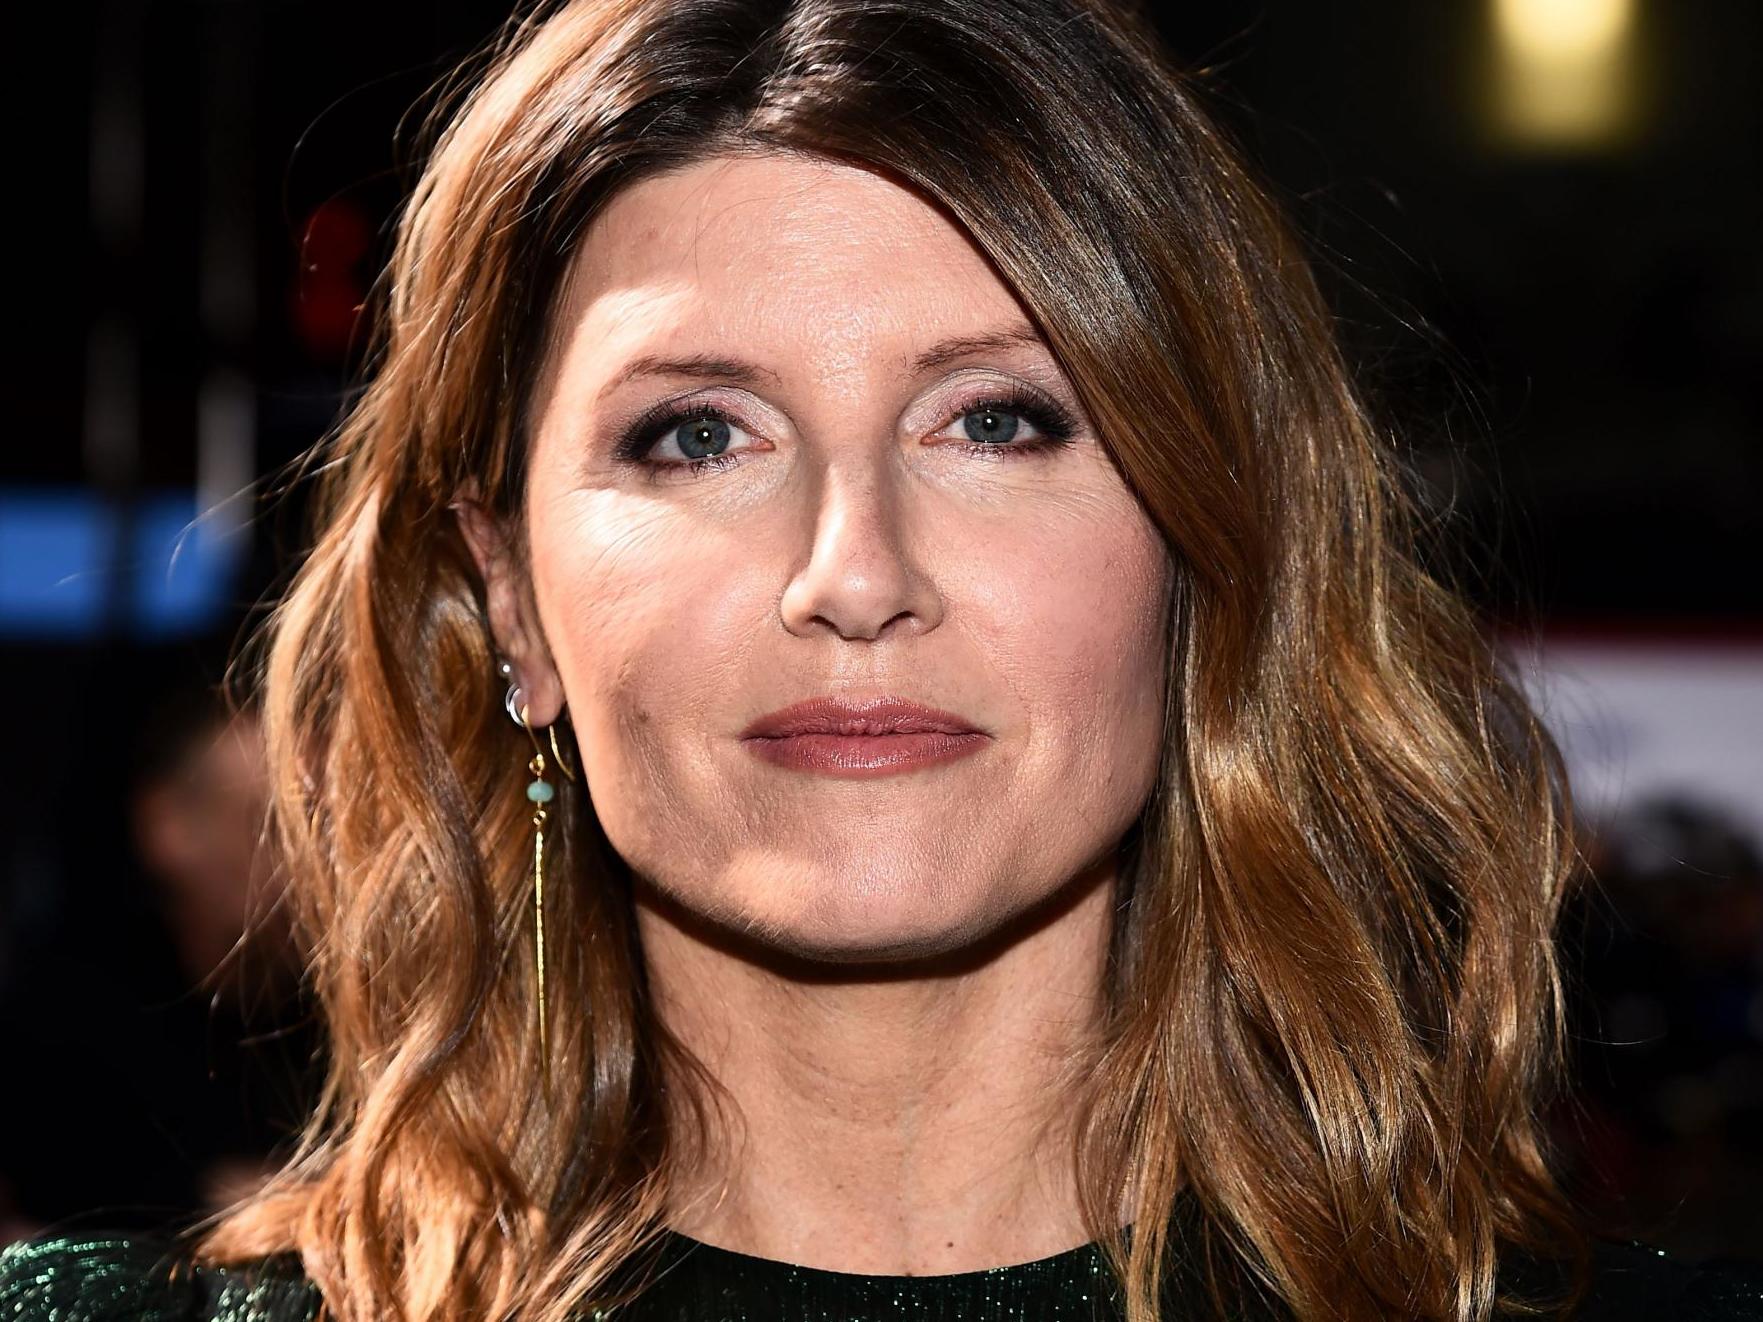 Sharon Horgan Its f***ing annoying it took a sexual assault apocalypse to make female stories sell The Independent The Independent pic